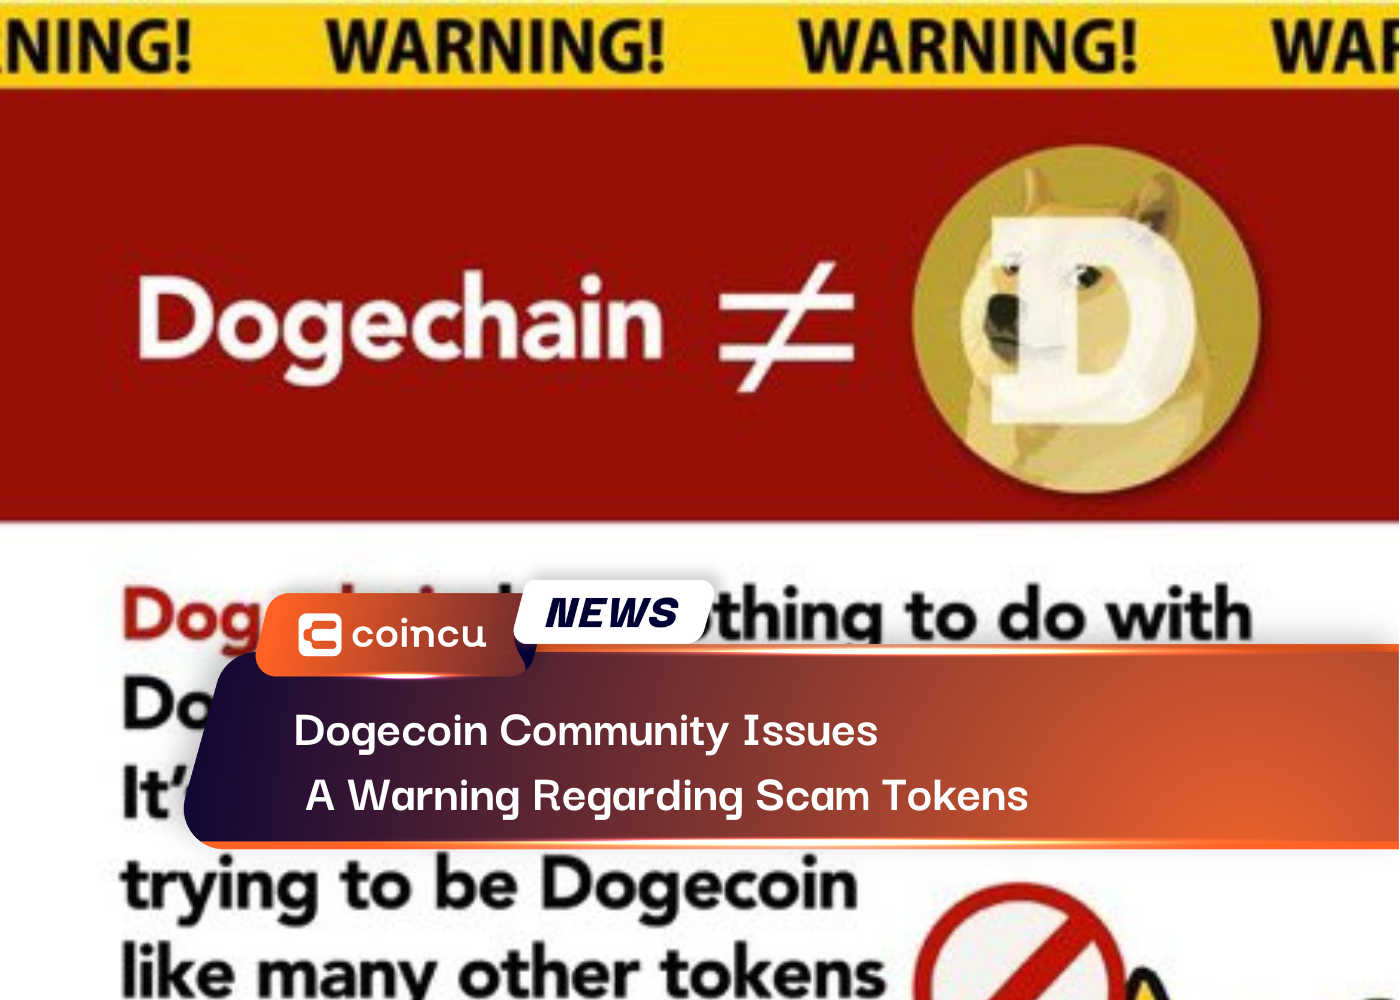 Dogecoin Community Issues